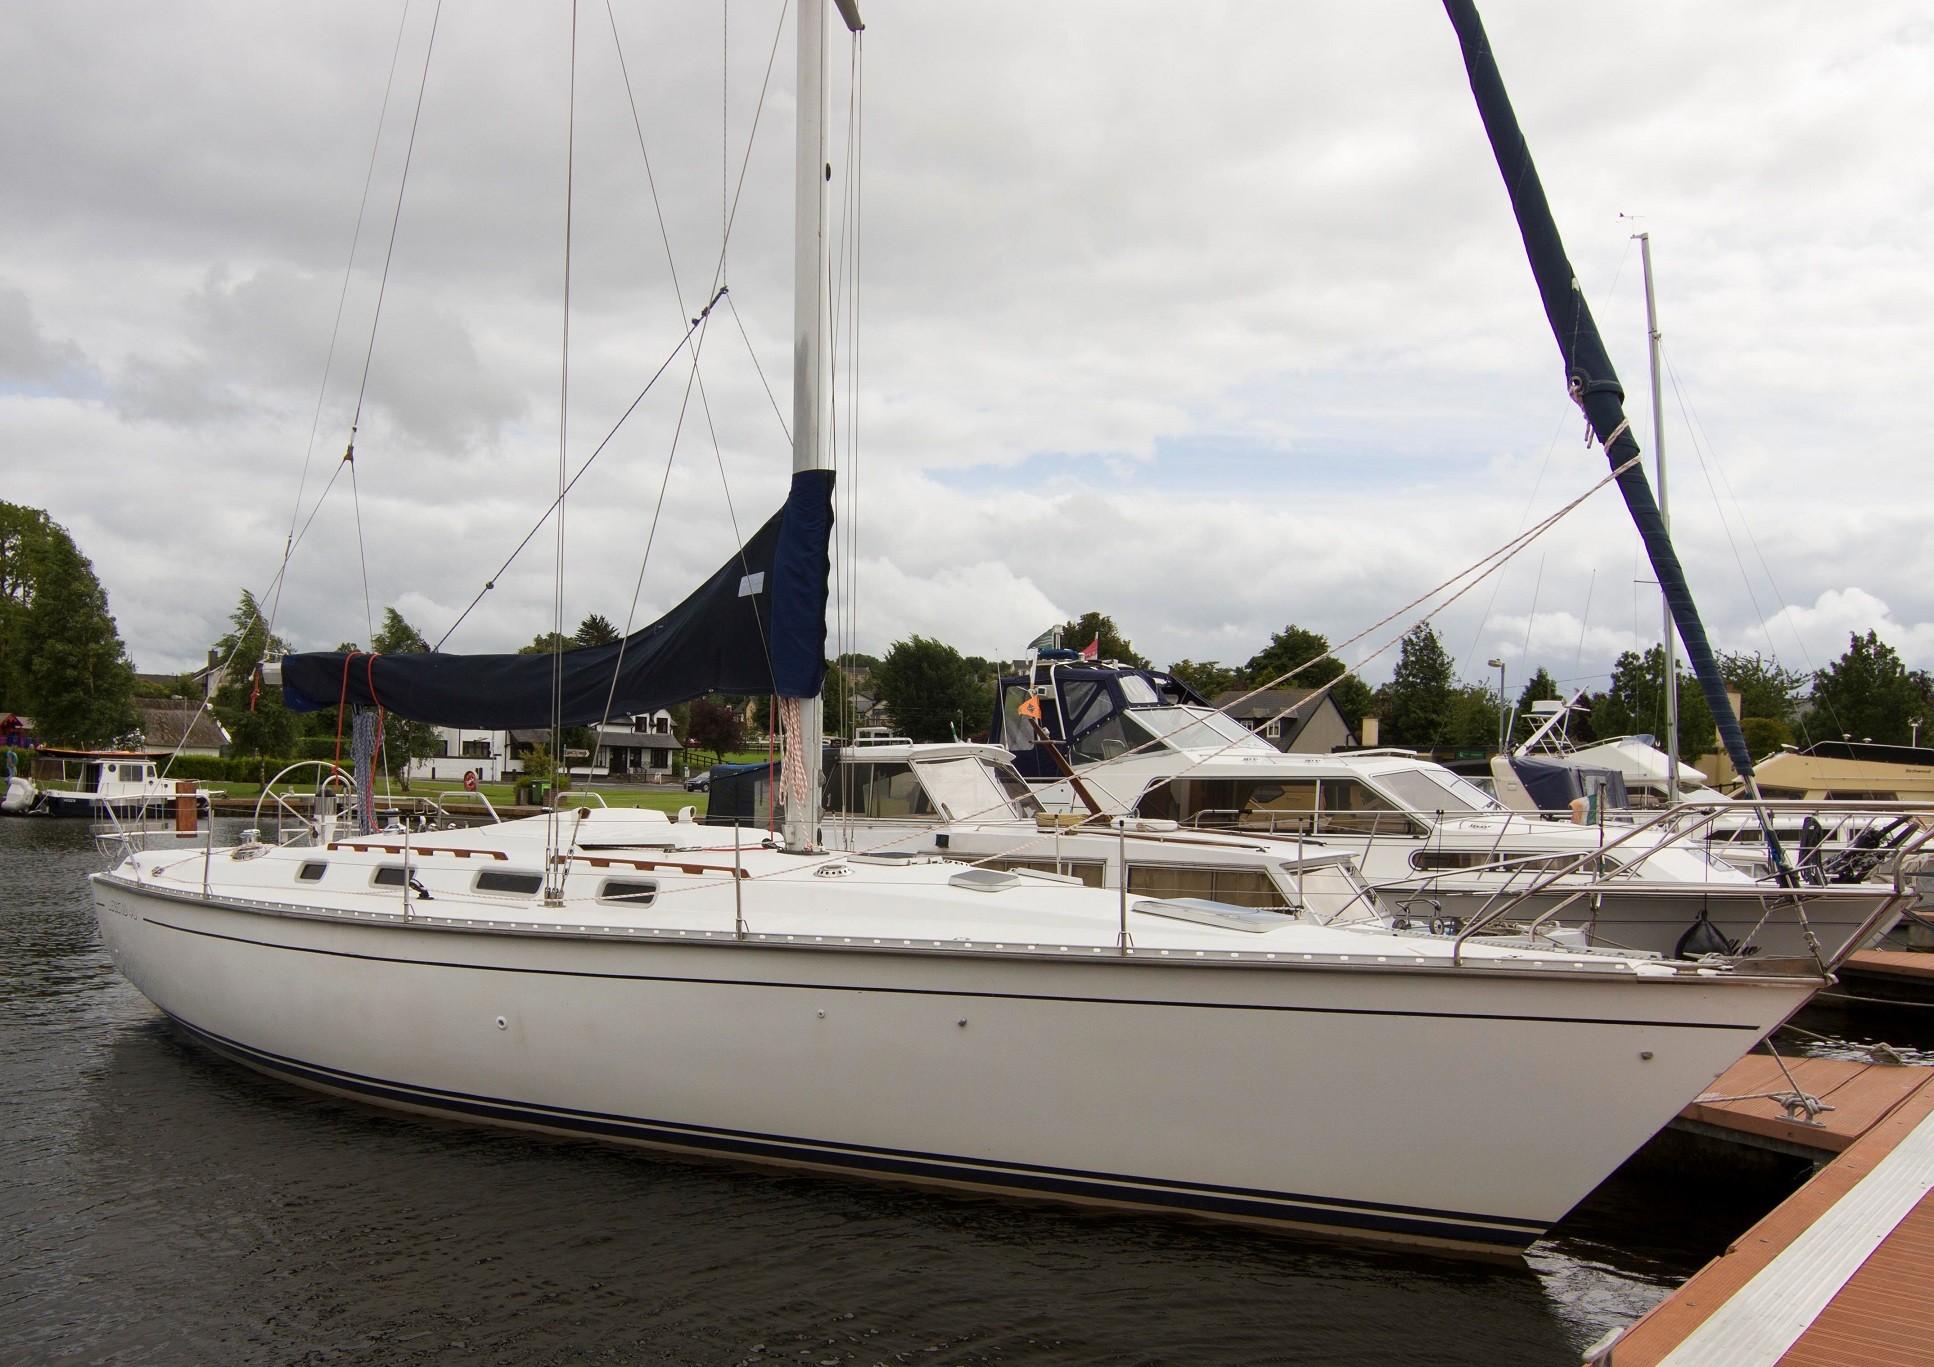 second hand yachts for sale ireland